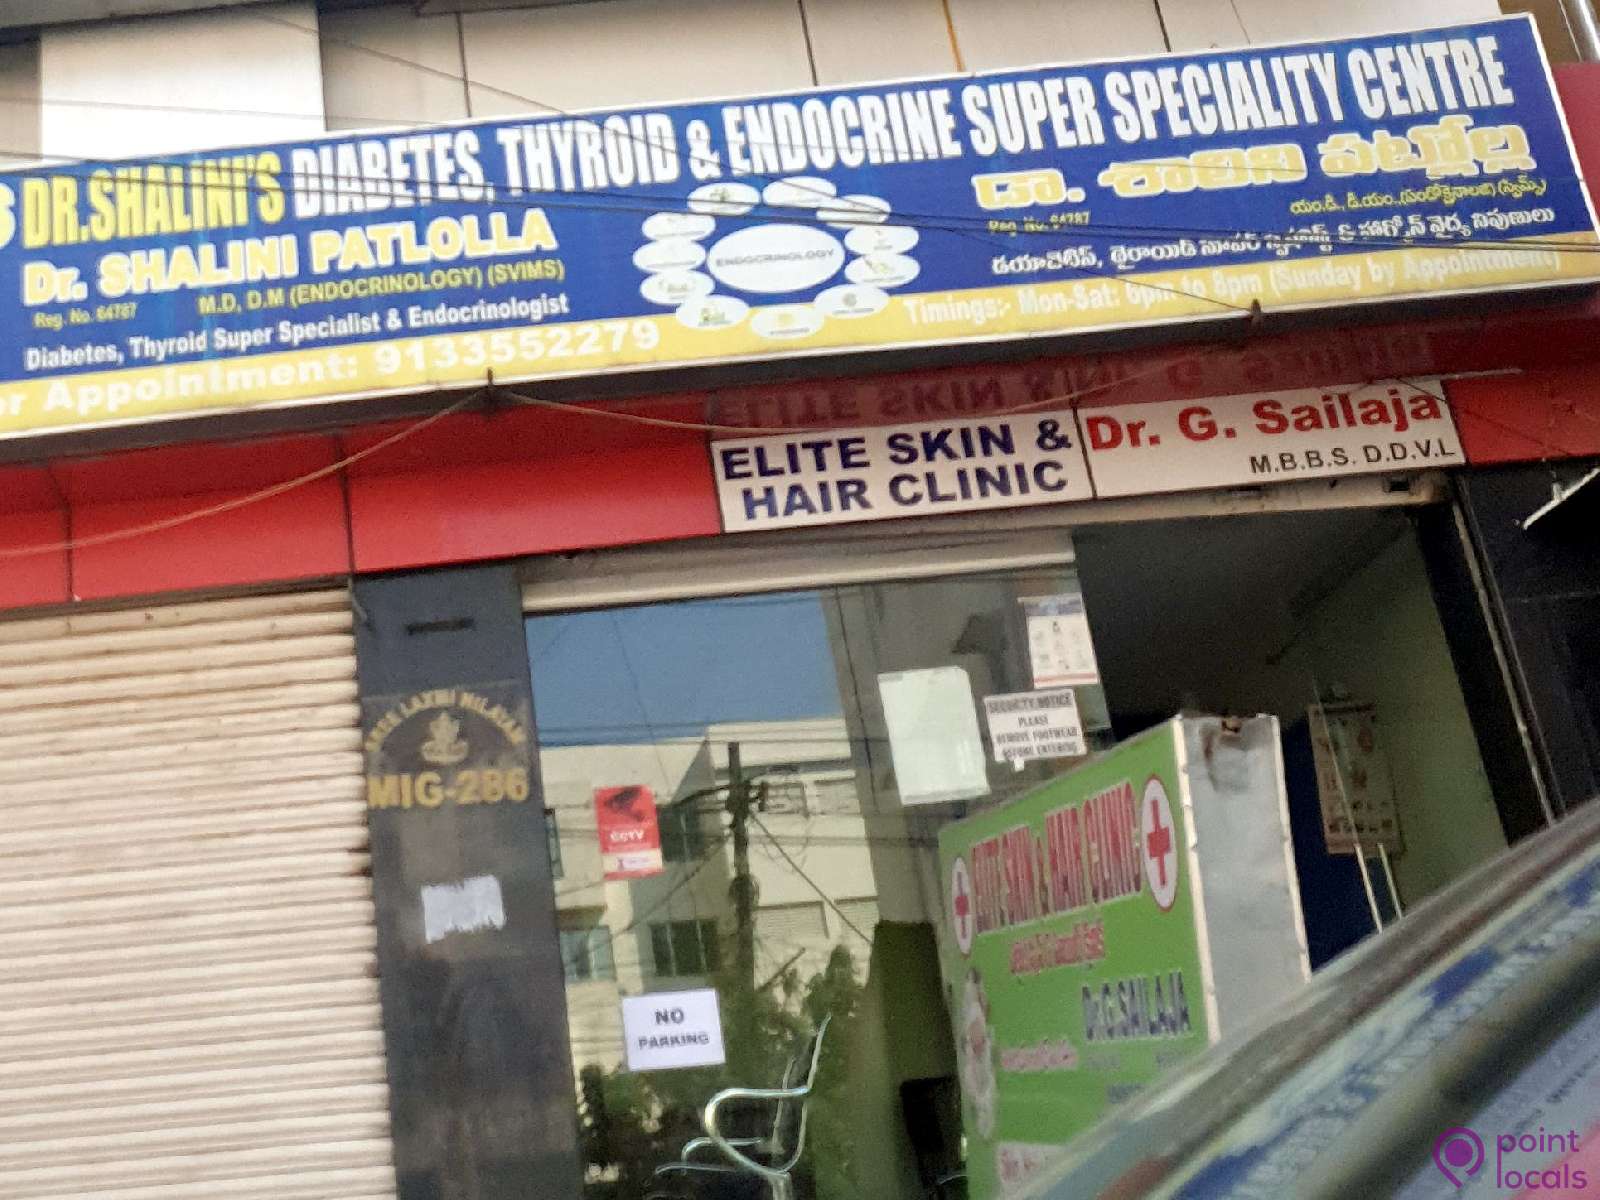 Dr Shalinis Diabetes Thyroid Endocrine Super Speciality Centre - Diabetic  Clinic in Hyderabad,Telangana | Pointlocals